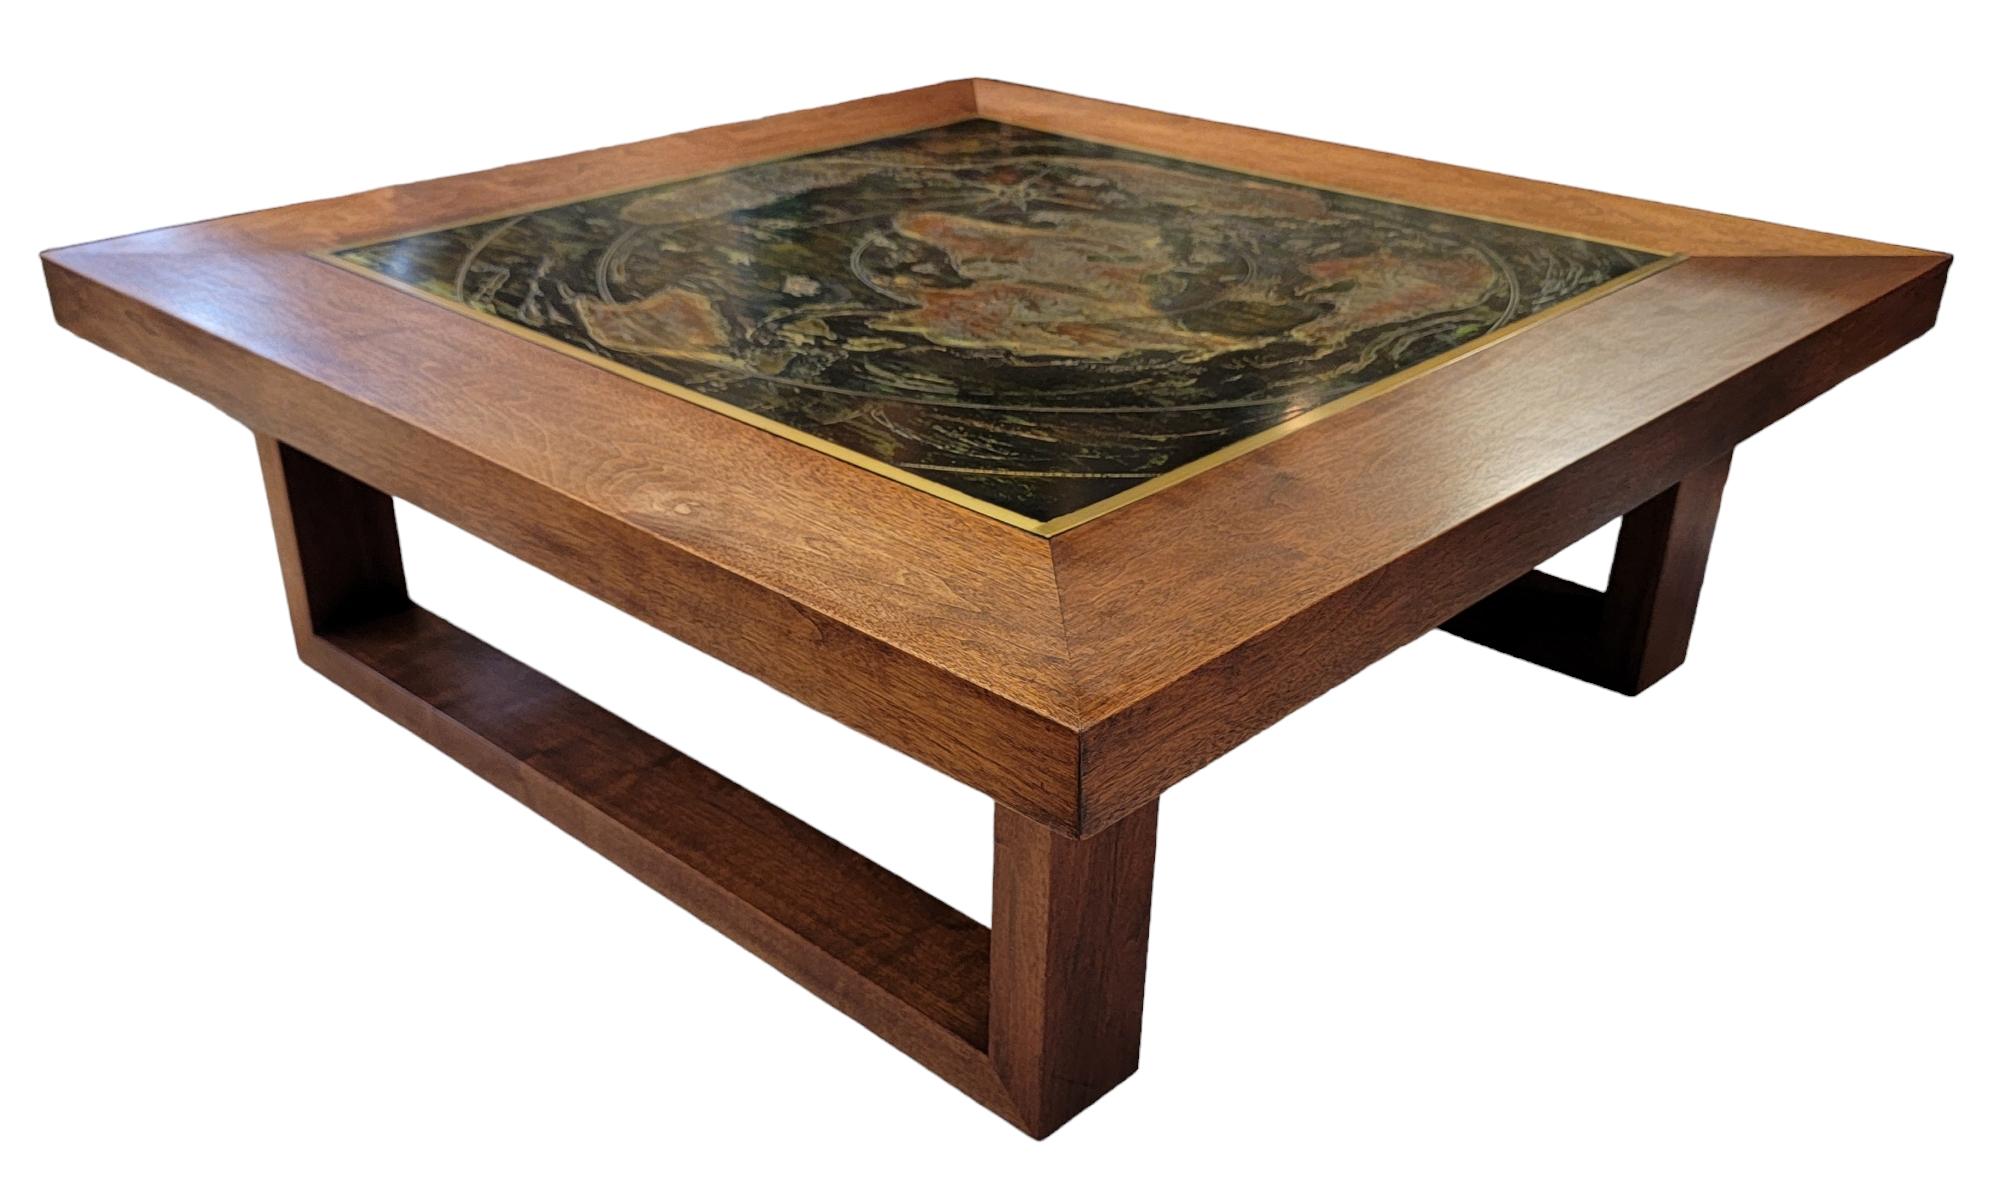 Gorgeous Bernhard Rohne Wooden coffee table with a beautiful oxidized brass table top. 
The wood is a clean straight edged look. With minimal signs of use.
The oxidized brass the has been placed on top of the coffee table is has an island design to